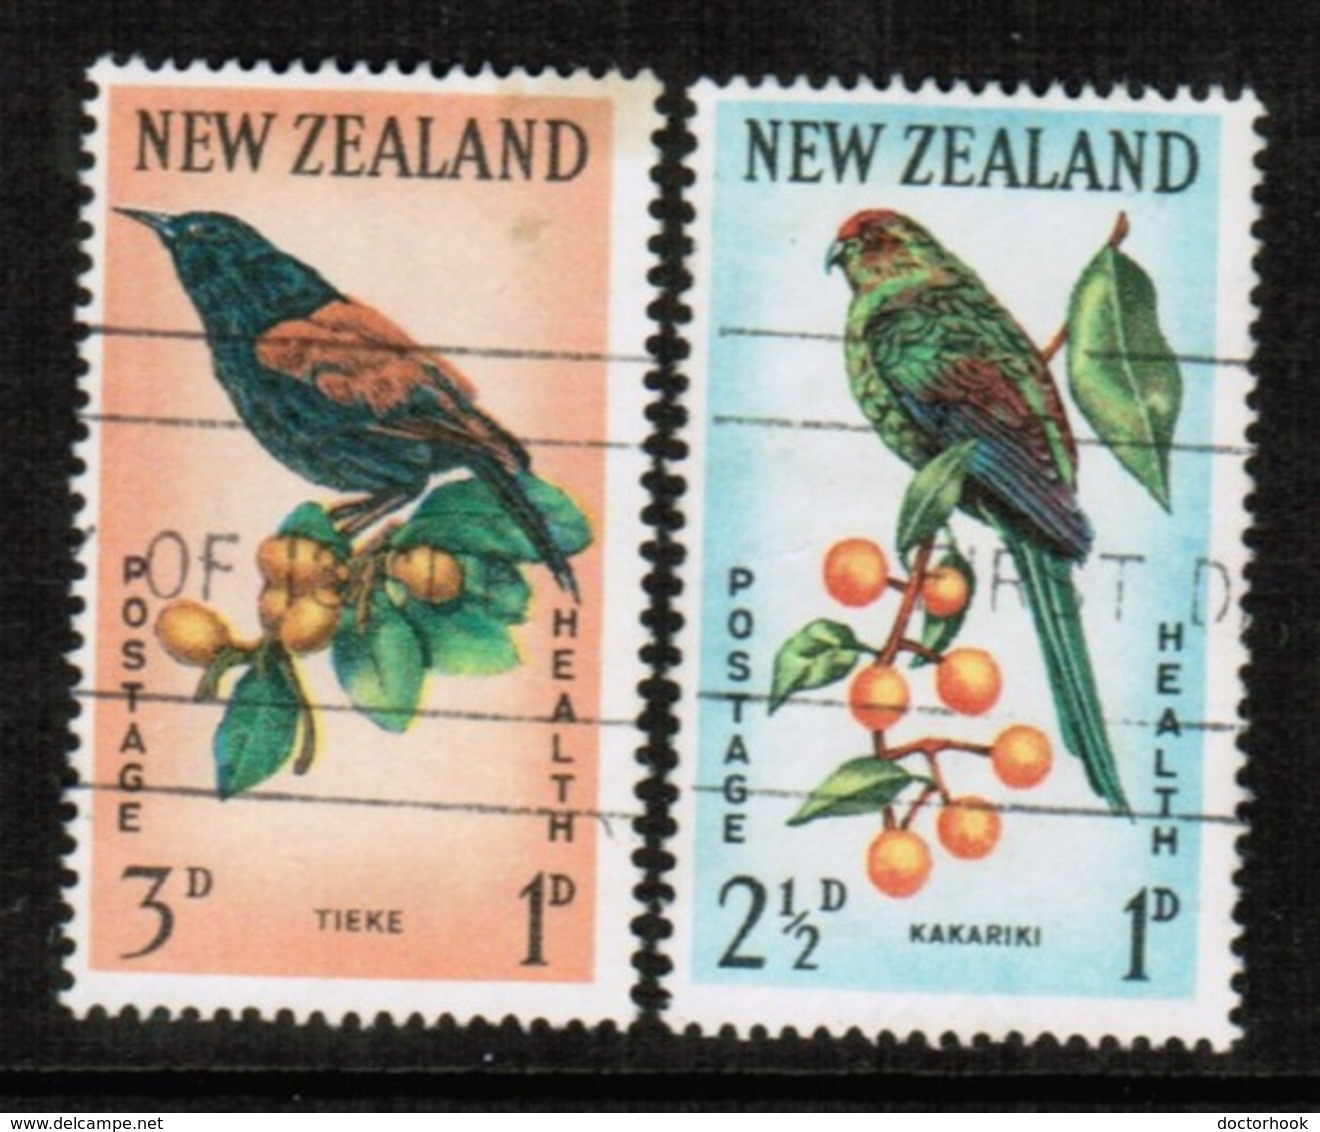 NEW ZEALAND  Scott # B 63-4 VF USED (Stamp Scan # 489) - Used Stamps